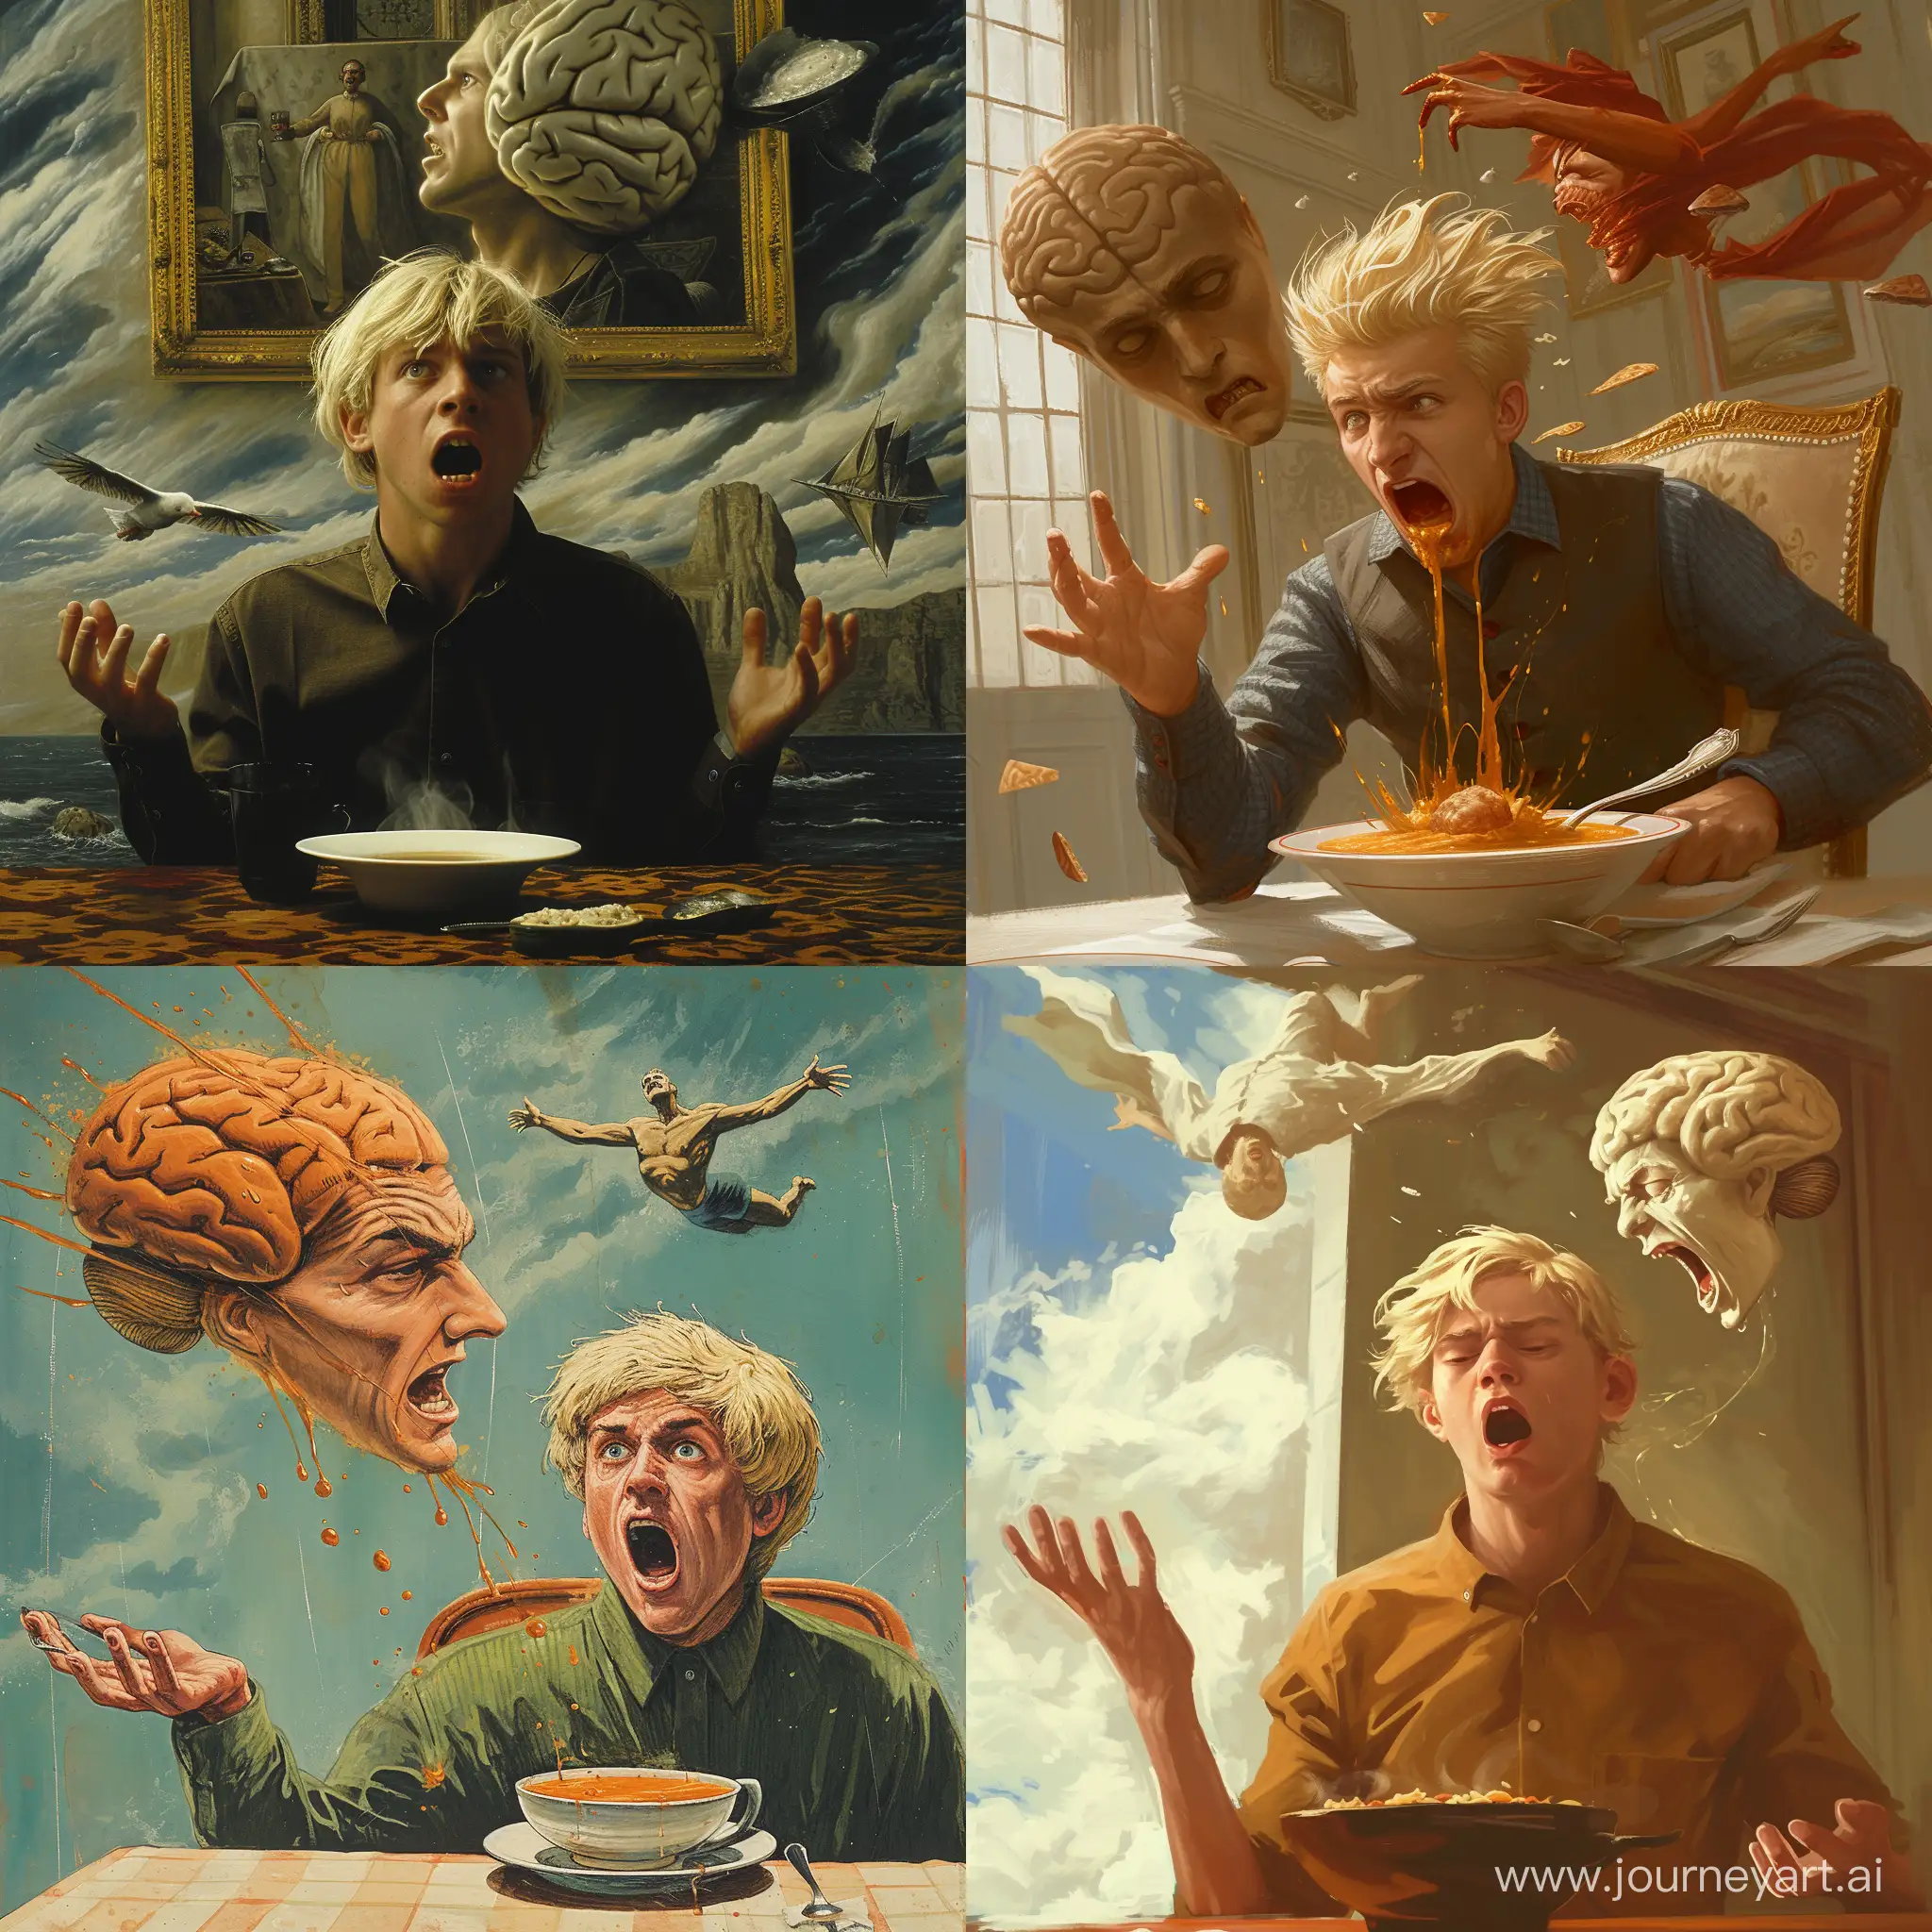 Blond-Man-Rejects-Soup-While-Confronted-by-a-Flying-Human-Head